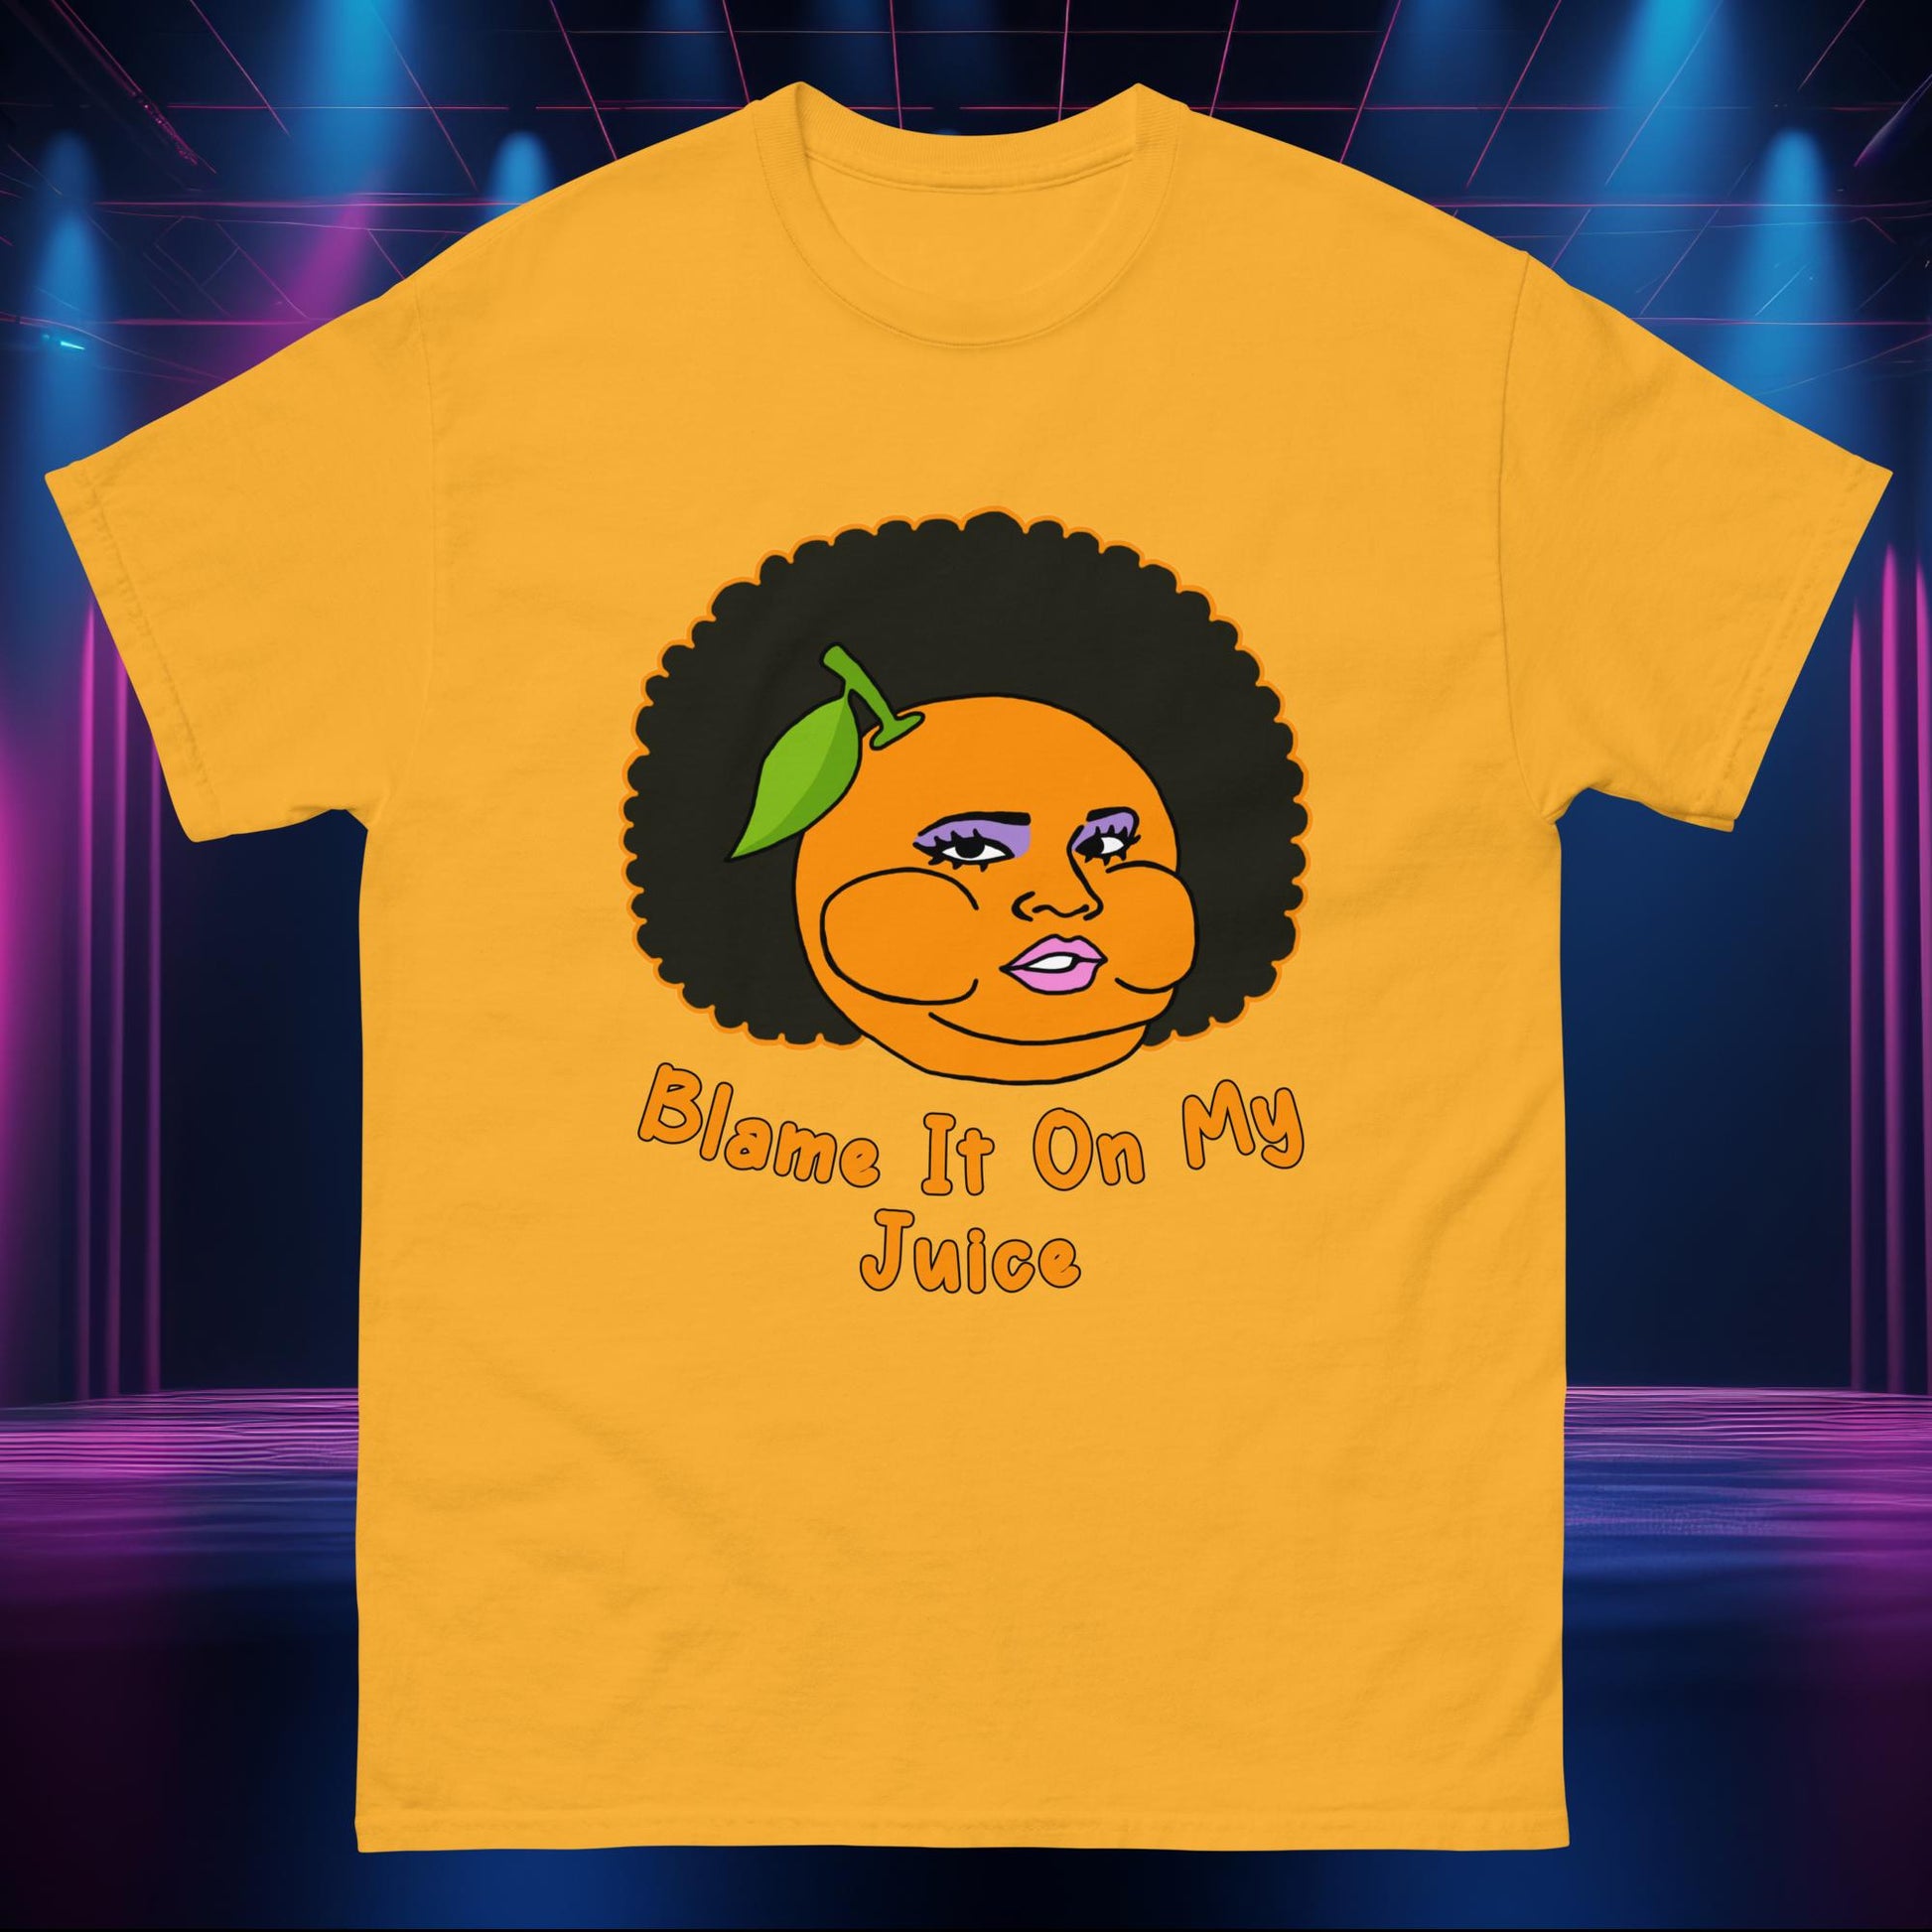 Blame It On My Juice Lizzo Special Tour Lizzo Merch Lizzo Gift Lizzo Song Lyrics Lizzo Shirt Next Cult Brand